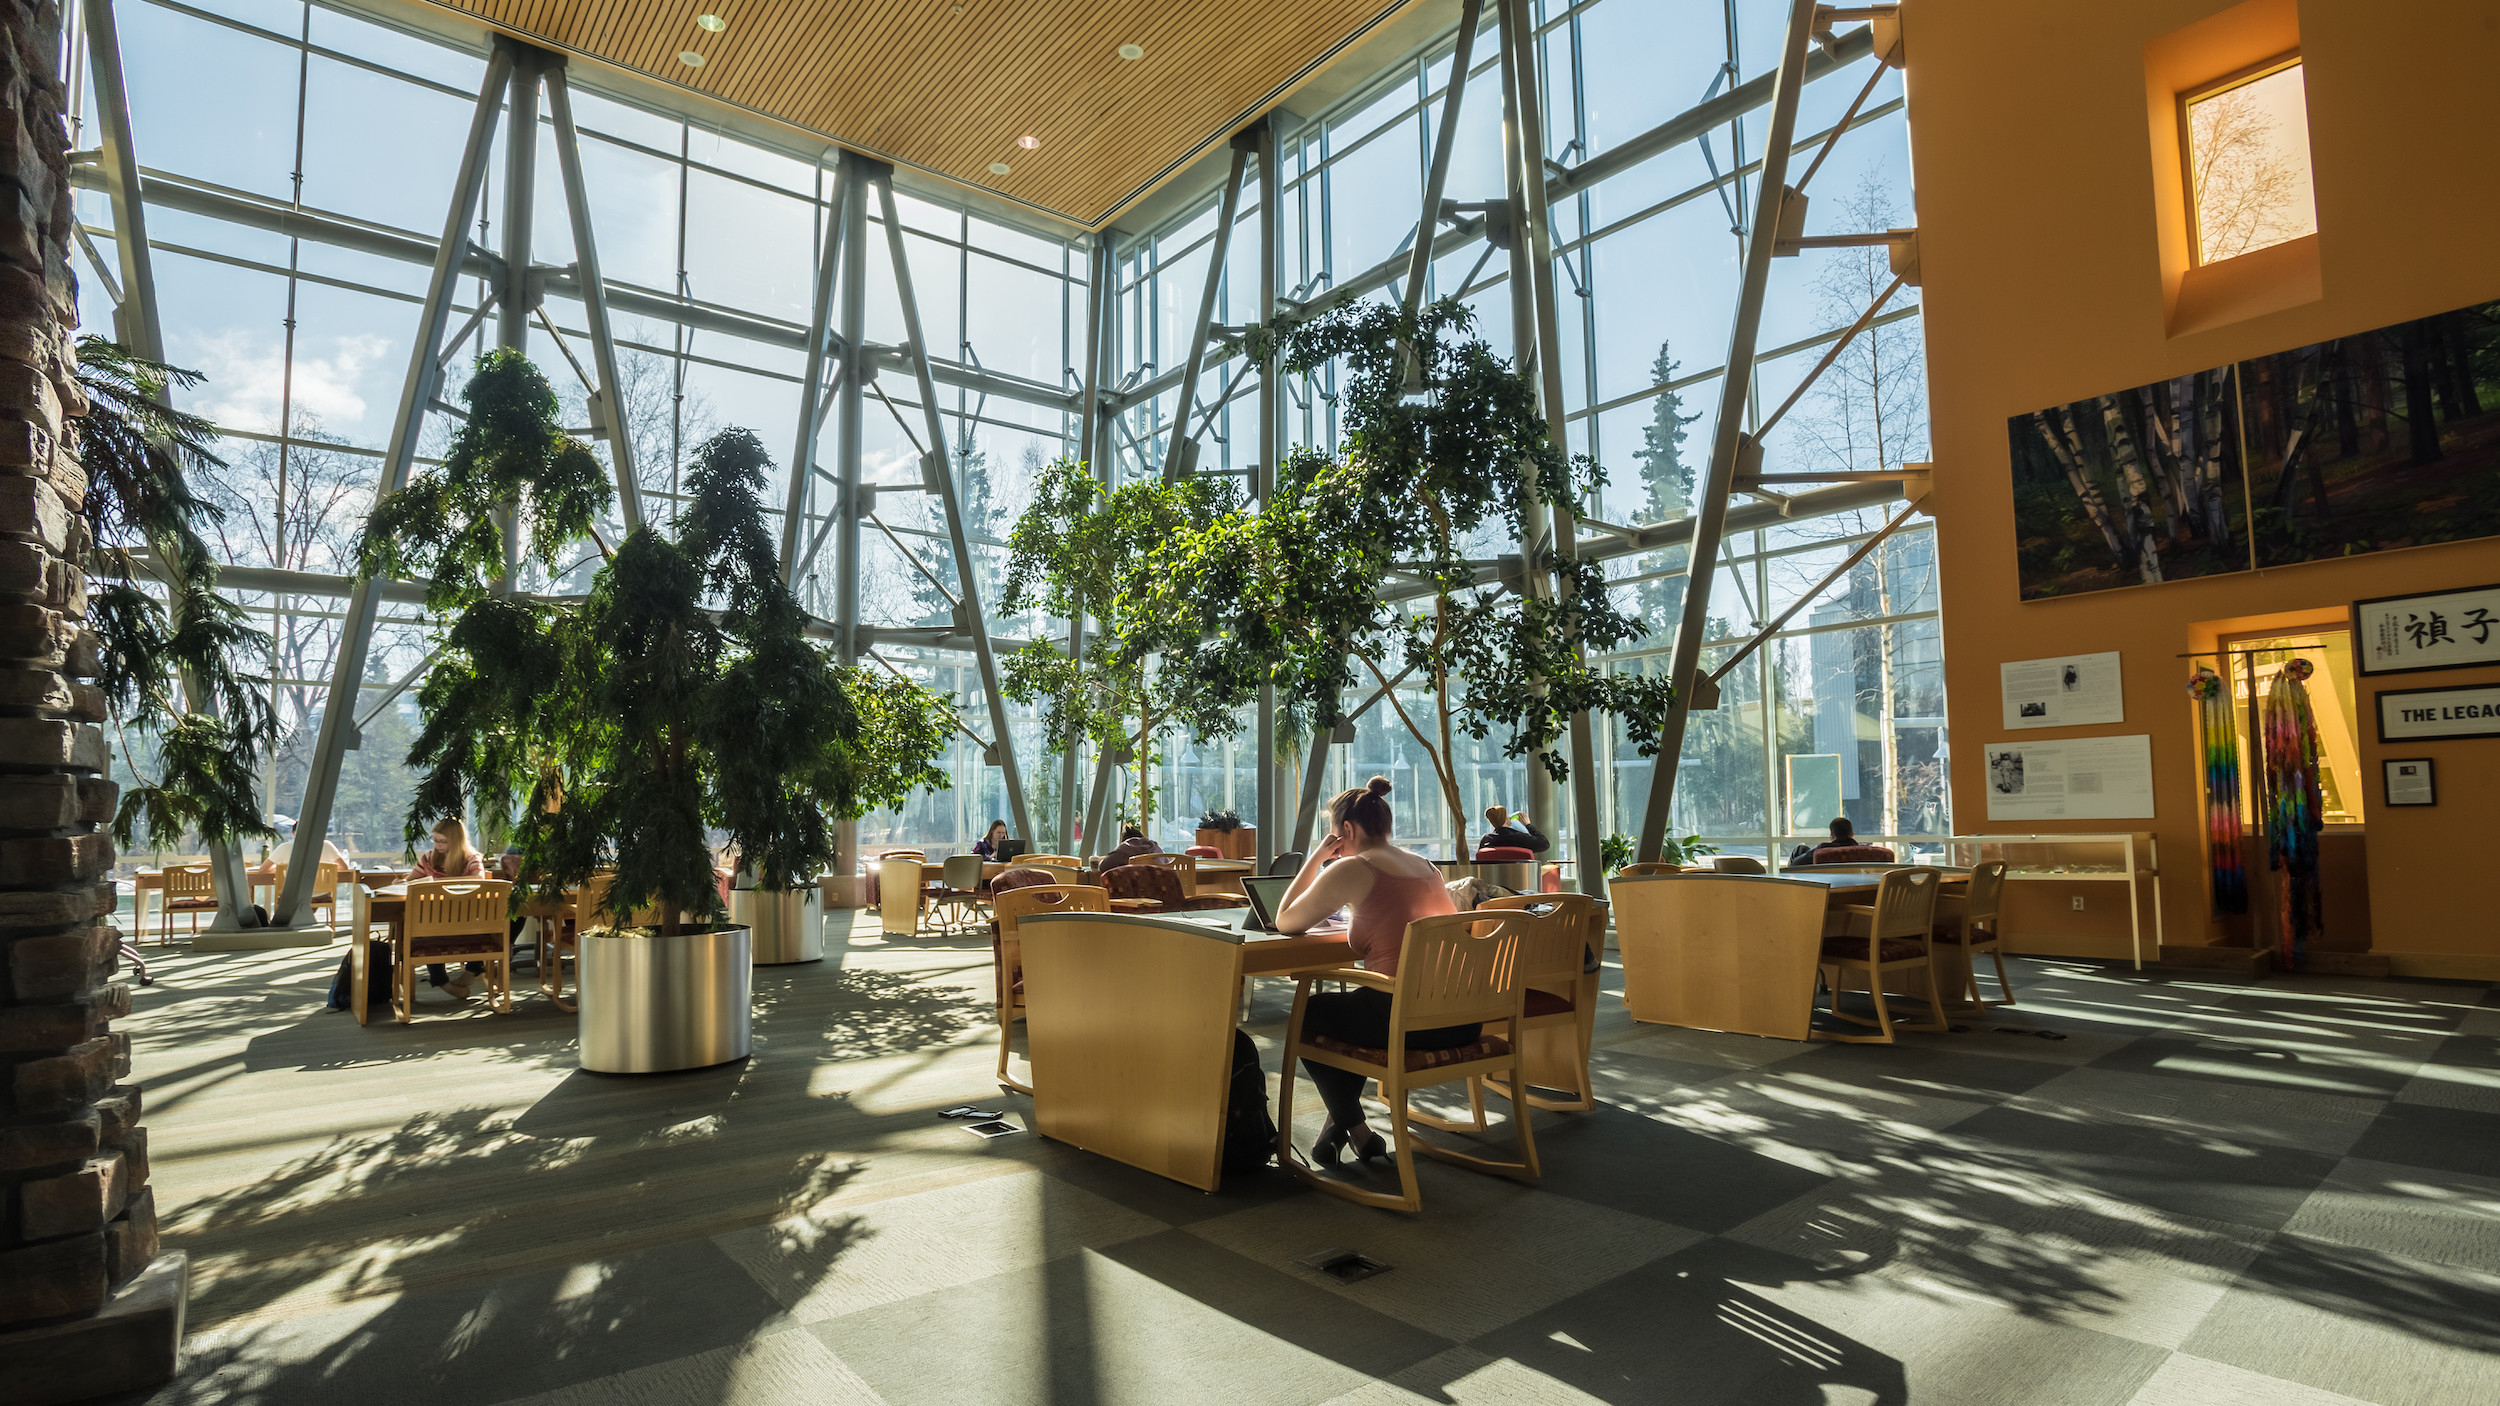 View of library from the inside, beautiful plants and sun shining through windows